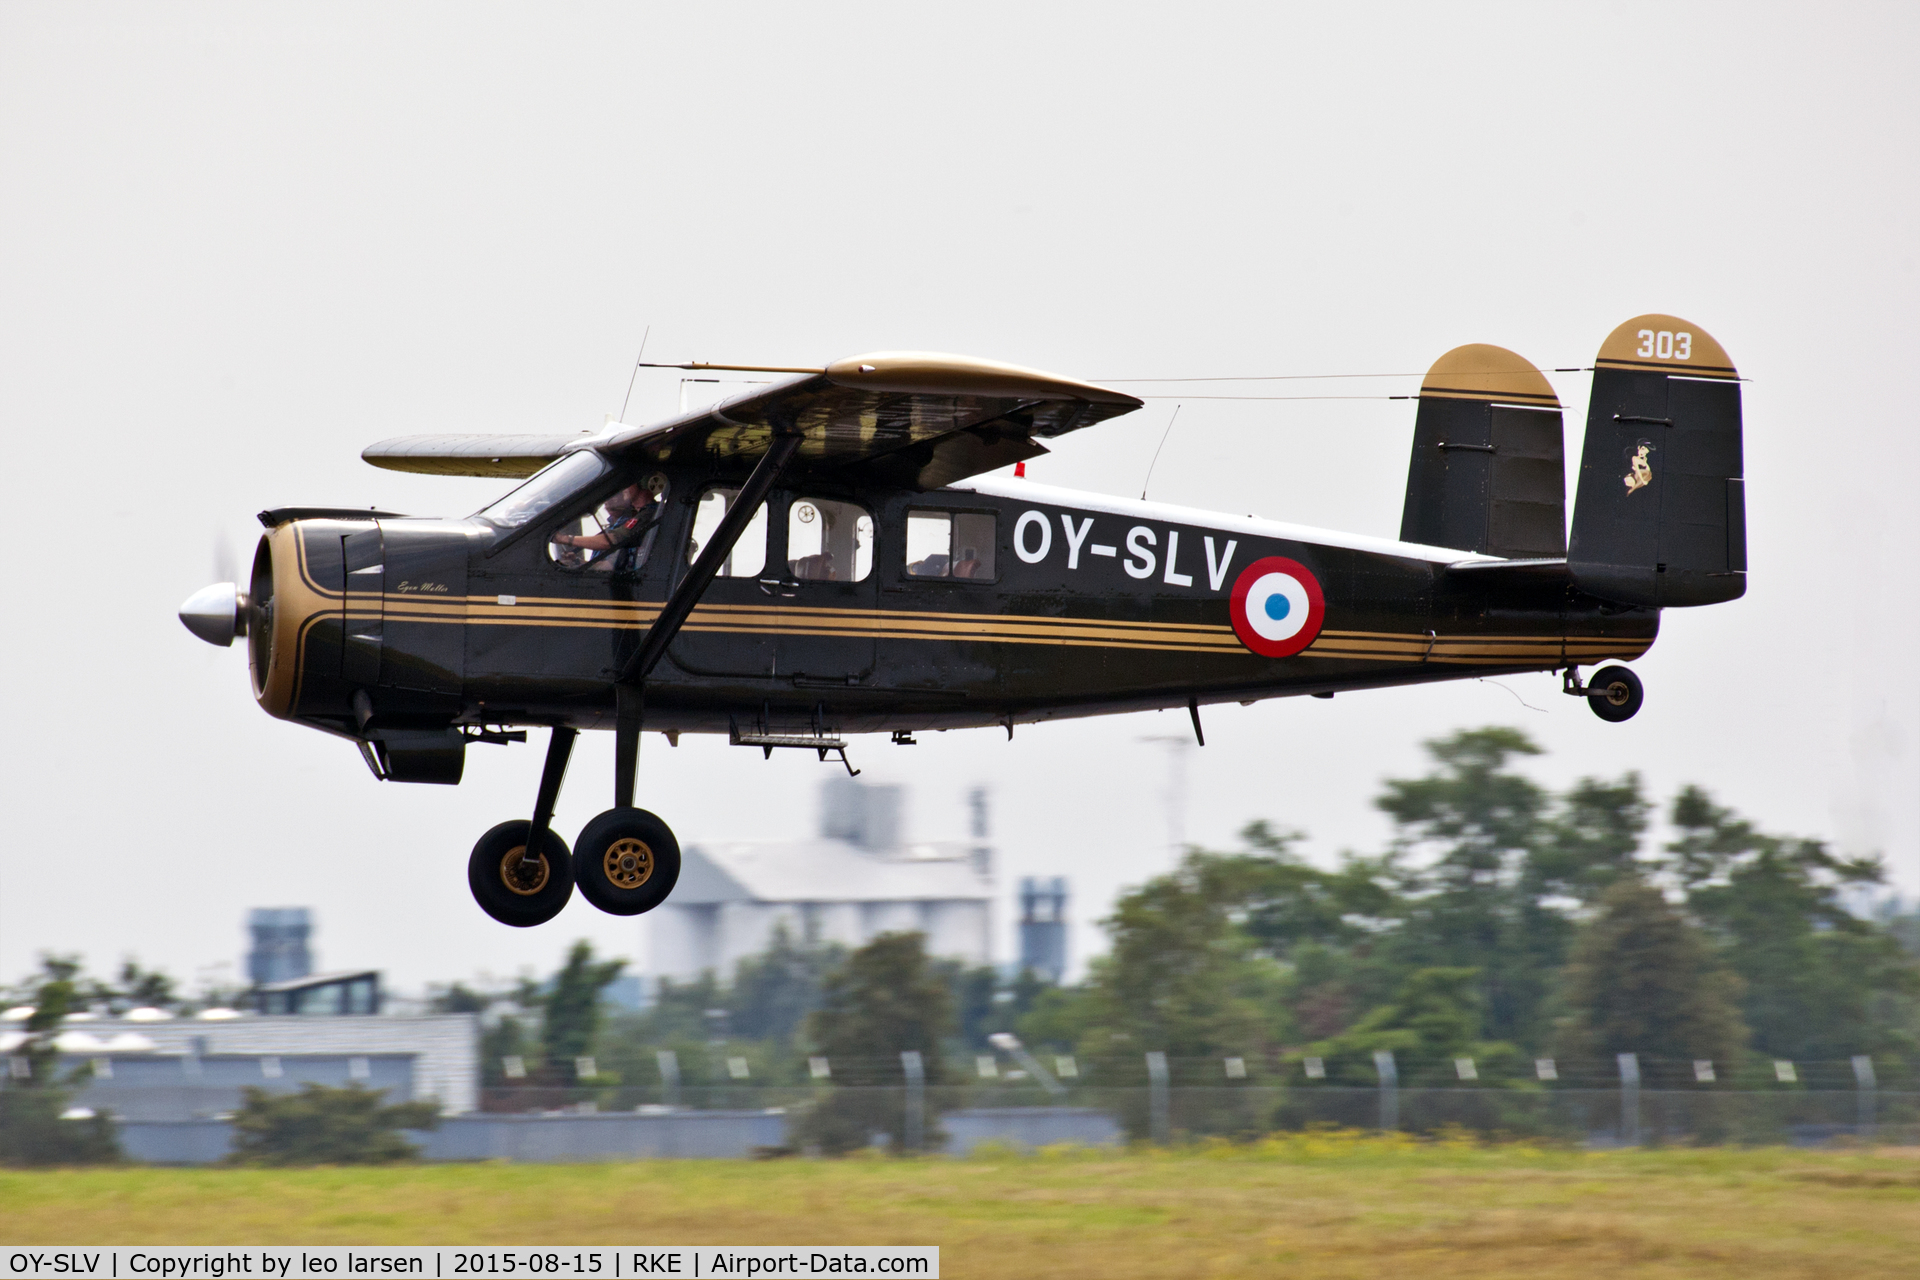 OY-SLV, 1961 Max Holste MH-1521M Broussard C/N 303, Roskilde Air Show 15.8.2015